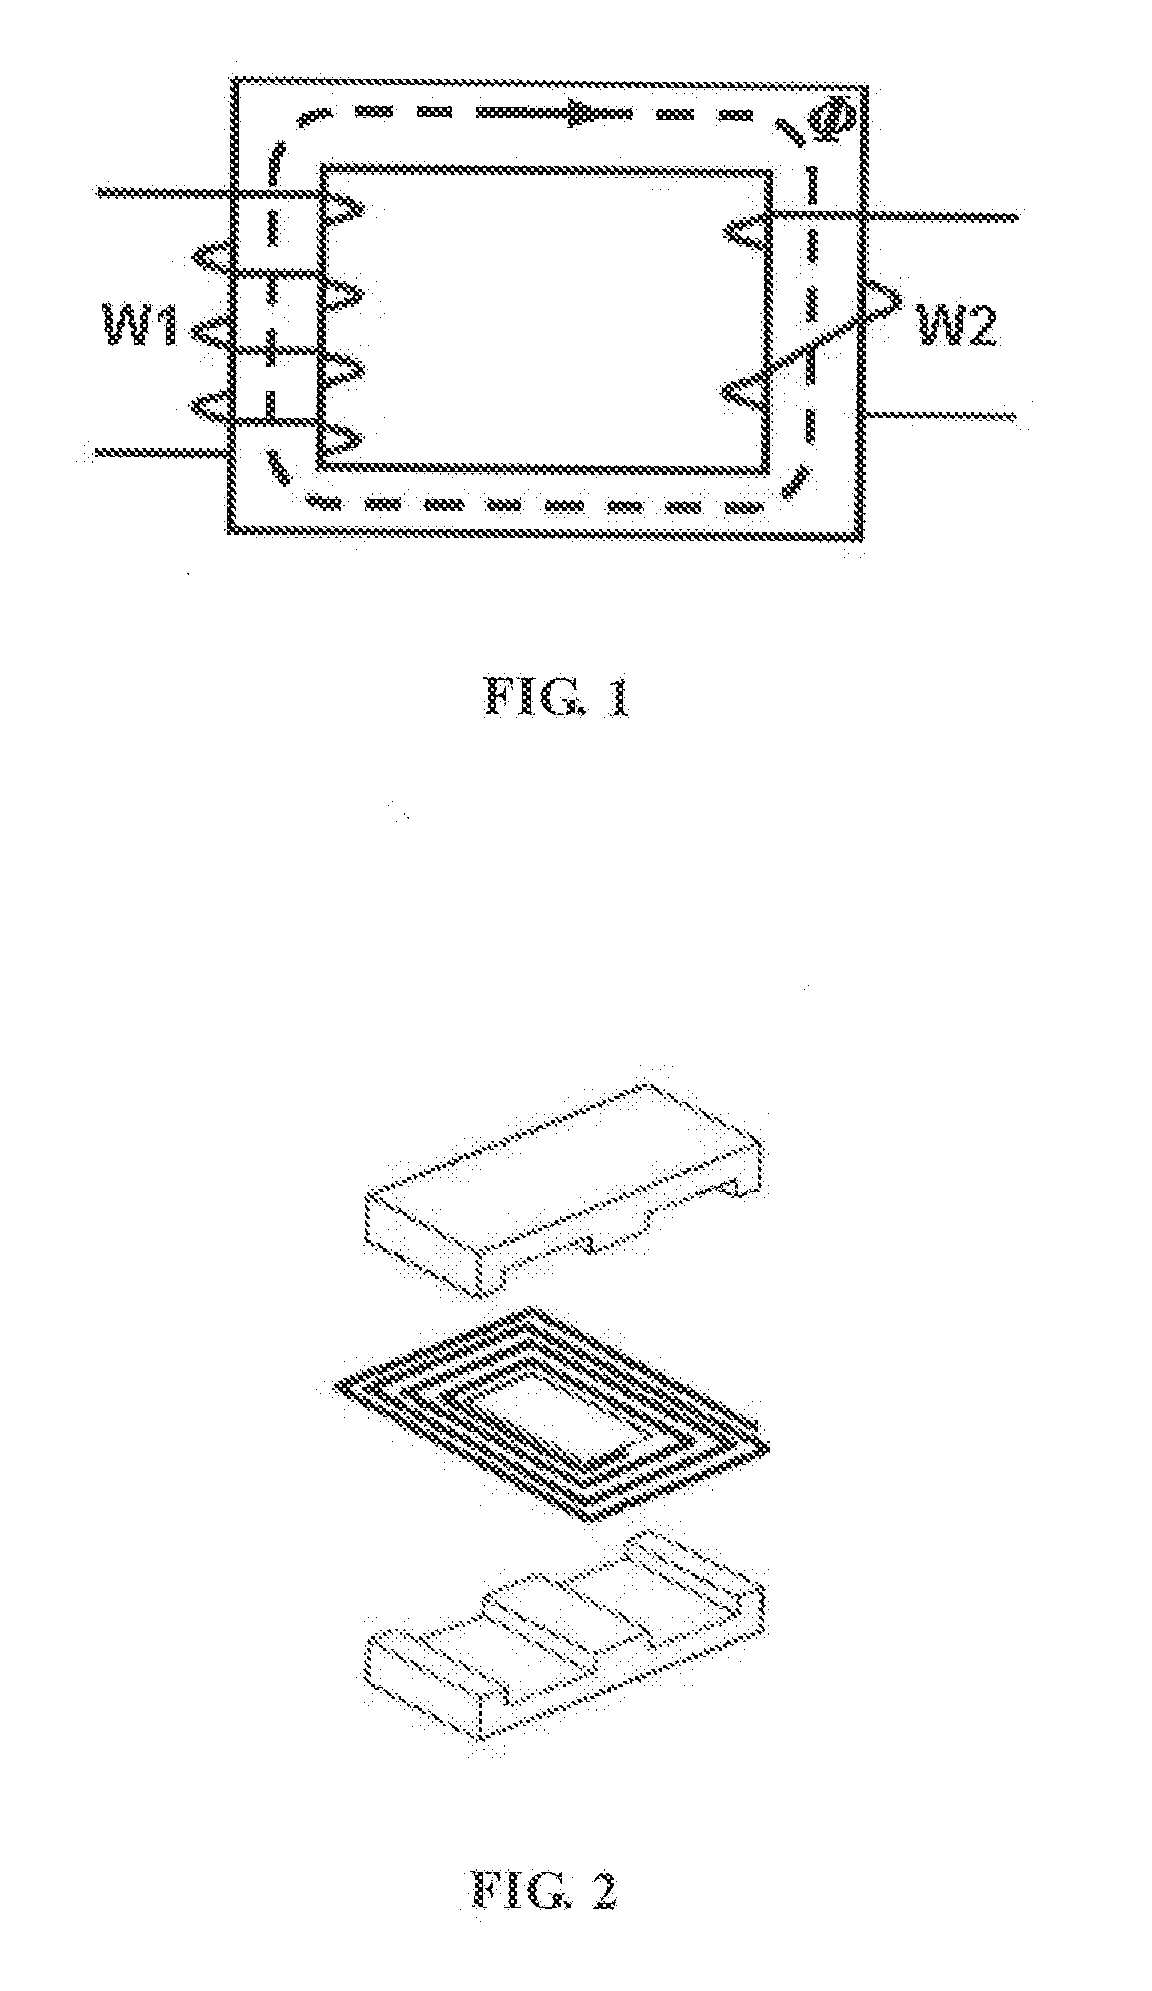 Electromagnetic induction device and method for manufacturing same